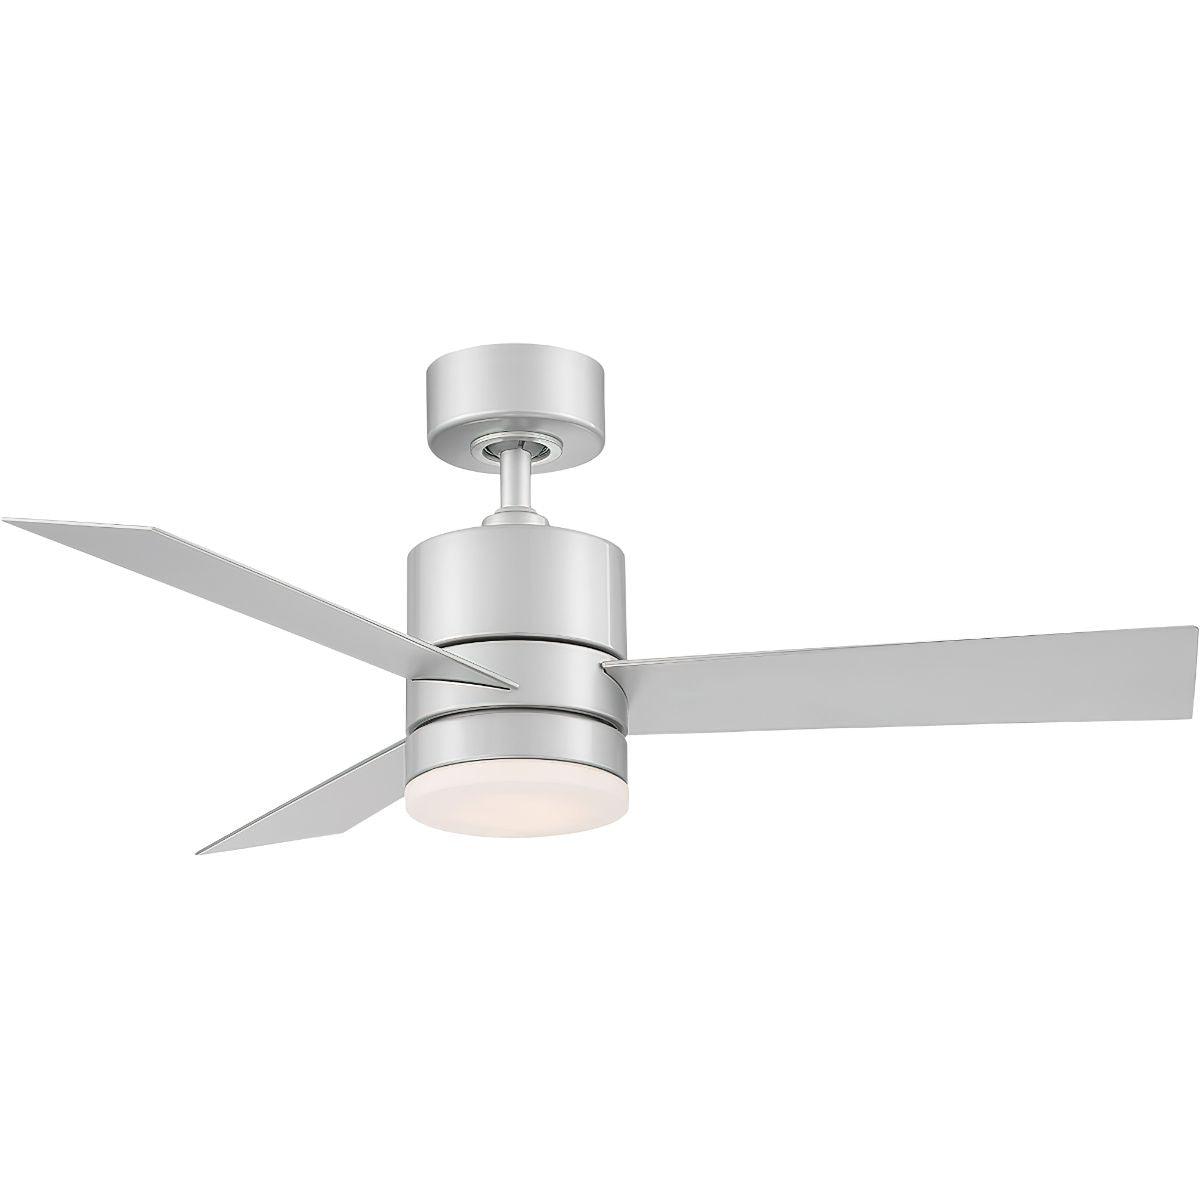 Axis 44 Inch Propeller Outdoor Smart Ceiling Fan With 3000K LED And Remote